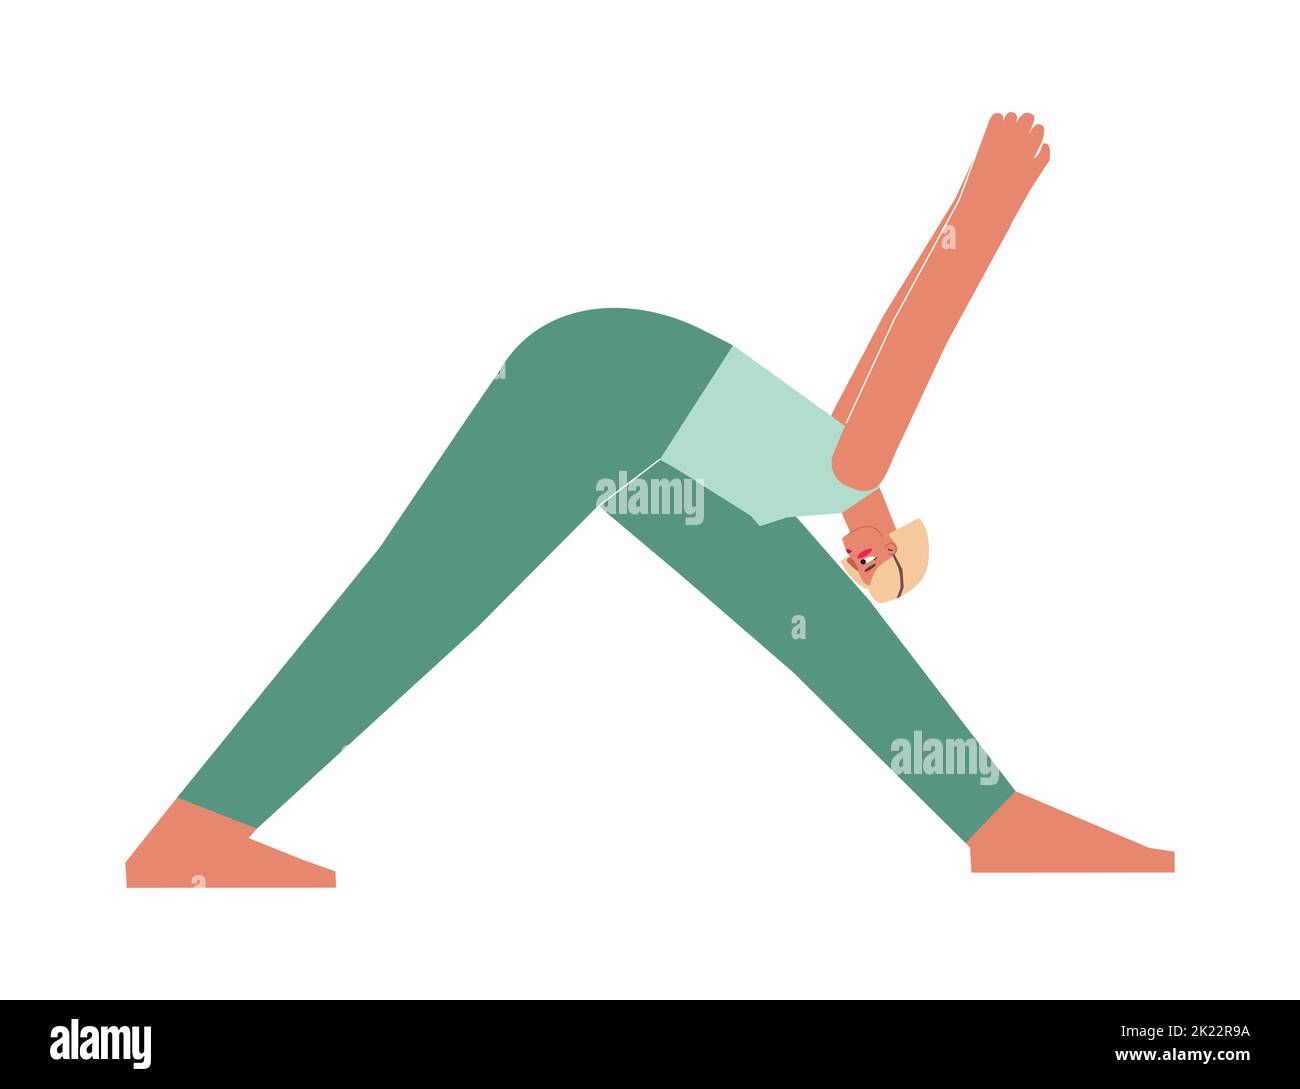 Vector isolated illustration with flat female character. Sportive woman learns posture Parsvottanasana at yoga class. Fitness exercise - Pyramid Pose Stock Vector